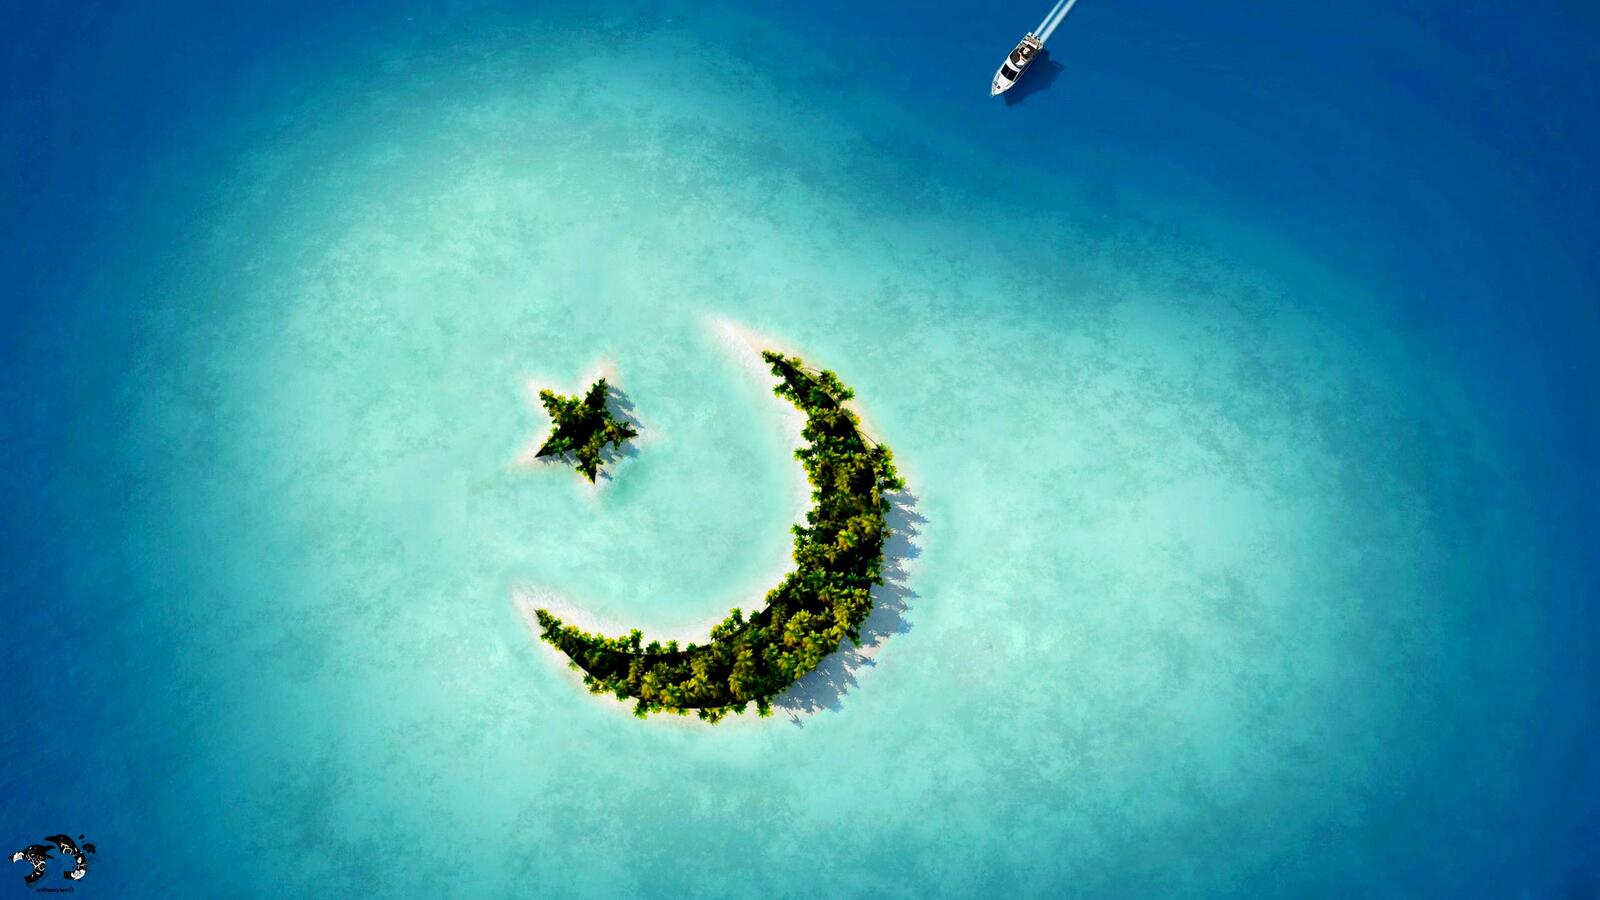 Free photo Wallpaper depicting an island in the deep sea in the form of a crescent moon with a star